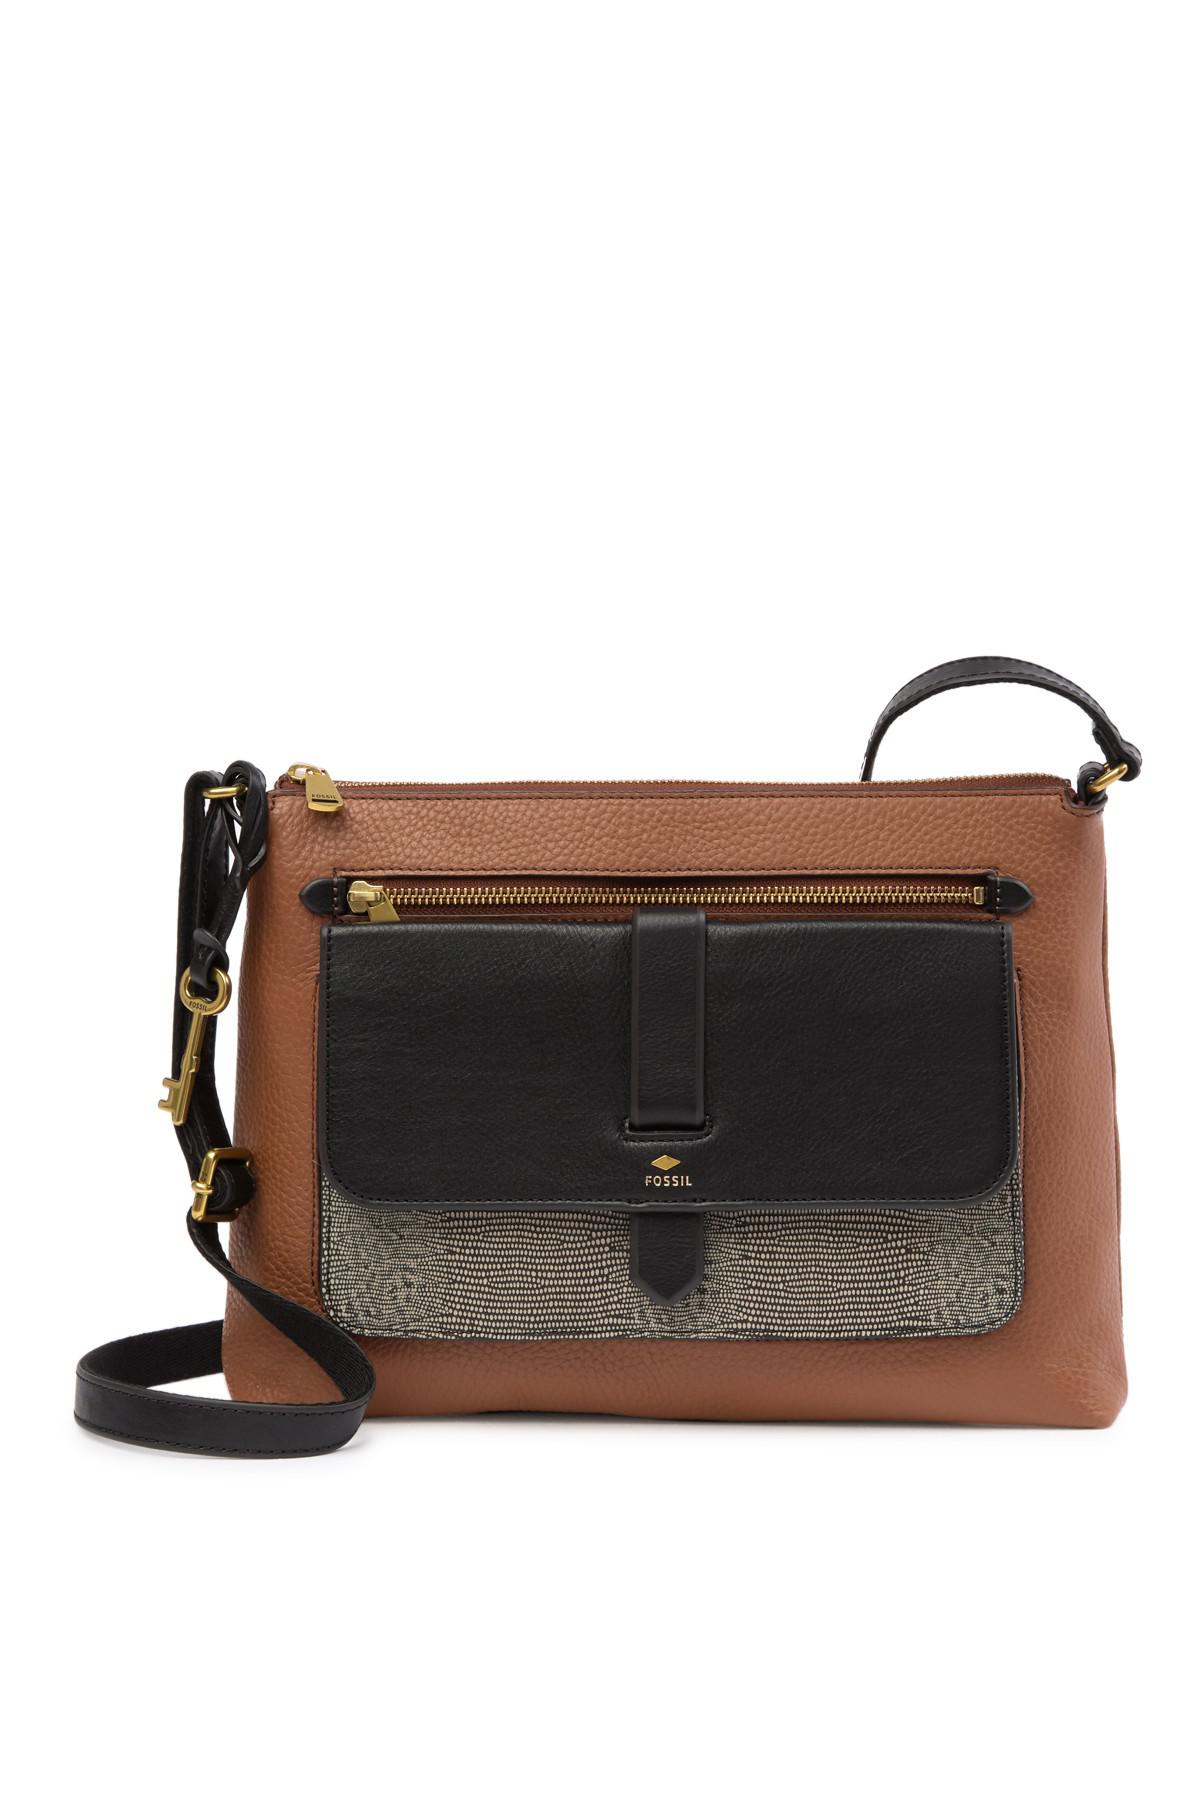 Fossil Kinley Large Leather Crossbody Bag in Brown | Lyst